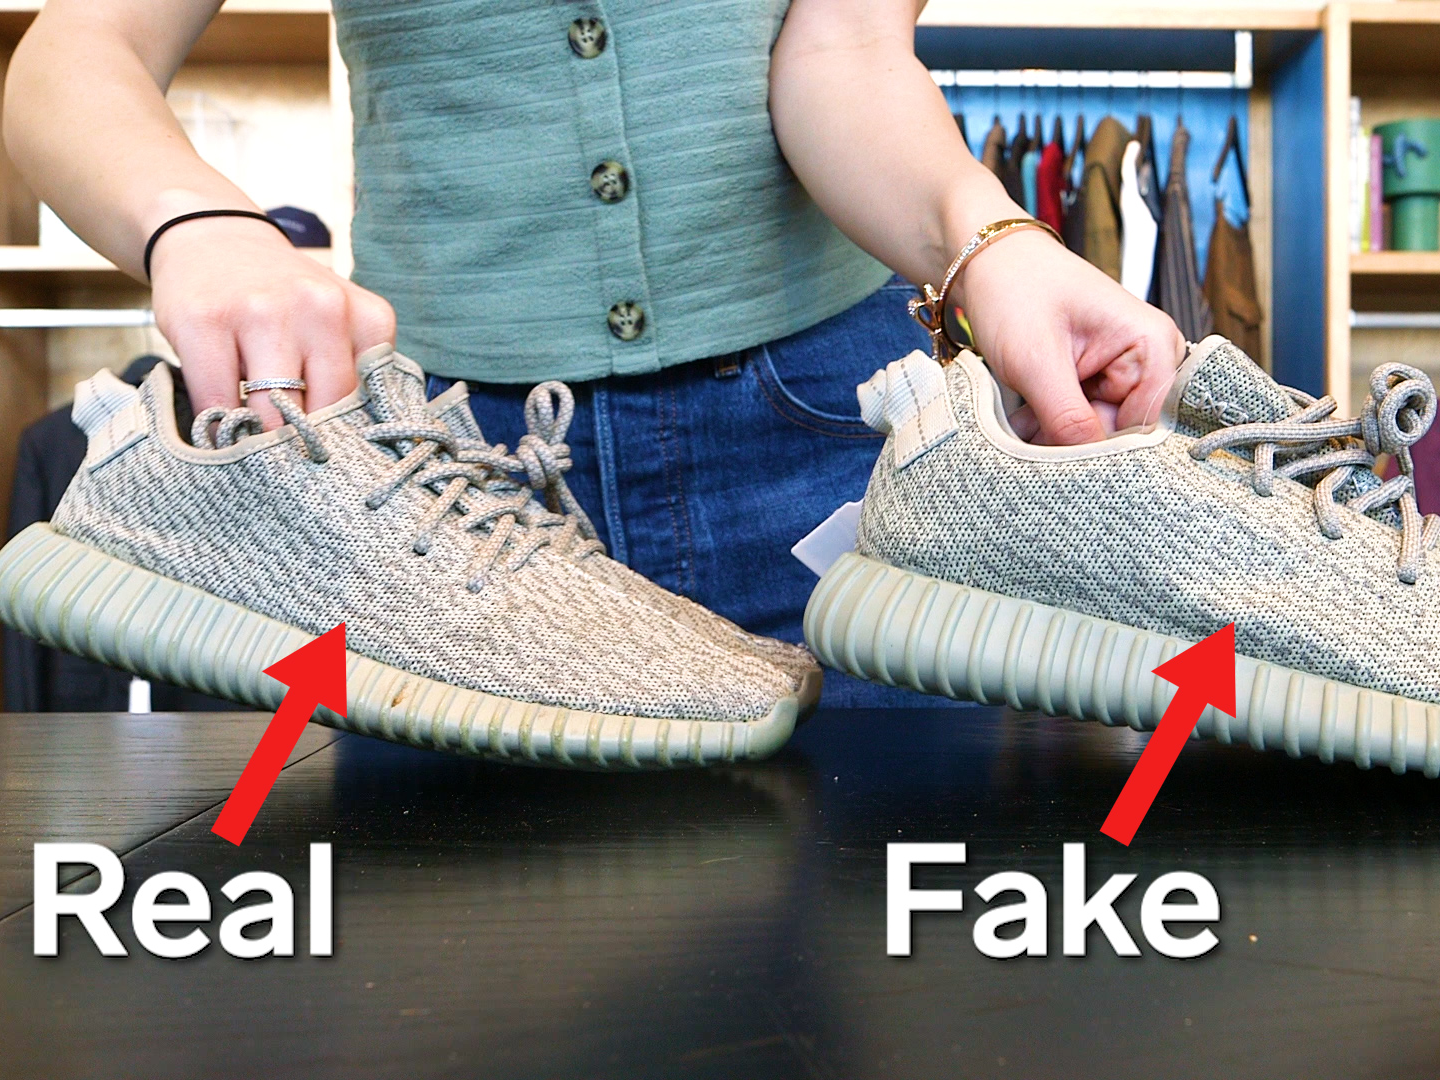 How to spot fake sneakers | Pulse Nigeria